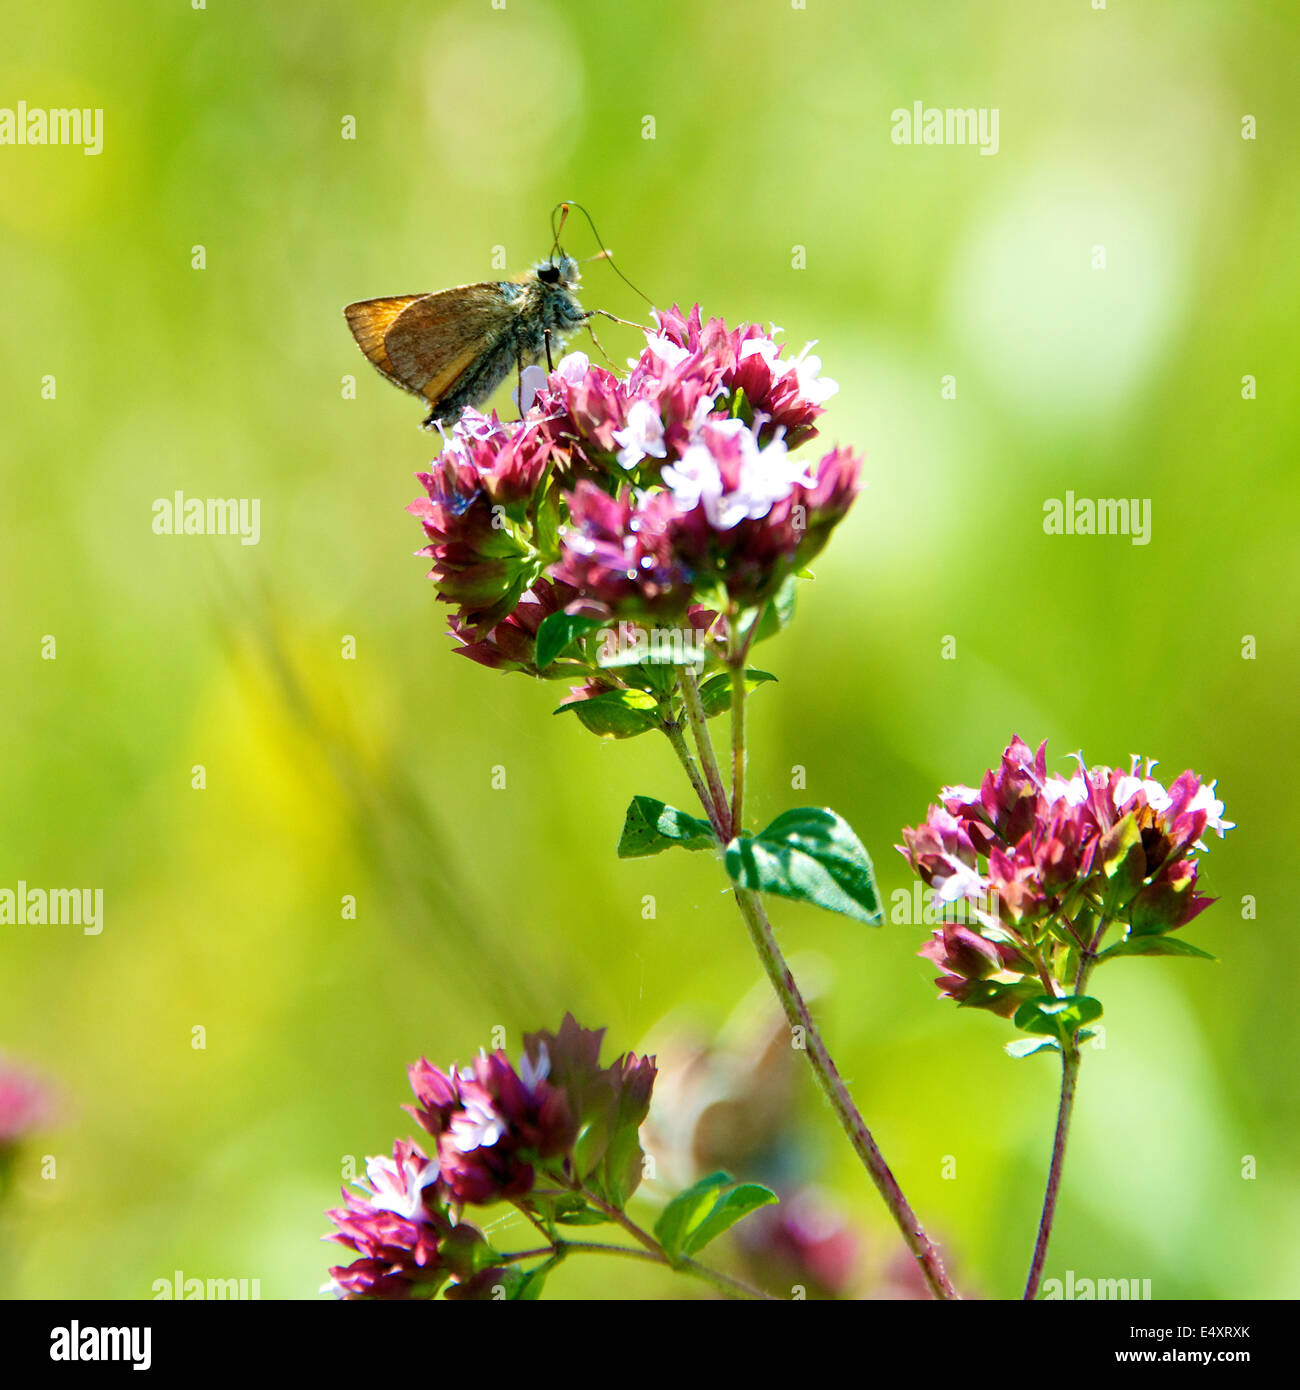 Reigate, Surrey. 17th July, 2014. The UK Big Butterfly Count takes place 19th July to 10th August. Butterflies on the North Downs, Thursday 17th July 2014. A Large Skipper Butterfly 'Ochlodes sylvanus' rests on a wild Thyme flower in a meadow at the foot of the North Downs at Reigate, Surrey  Credit:  Lindsay Constable / Alamy Live News Stock Photo